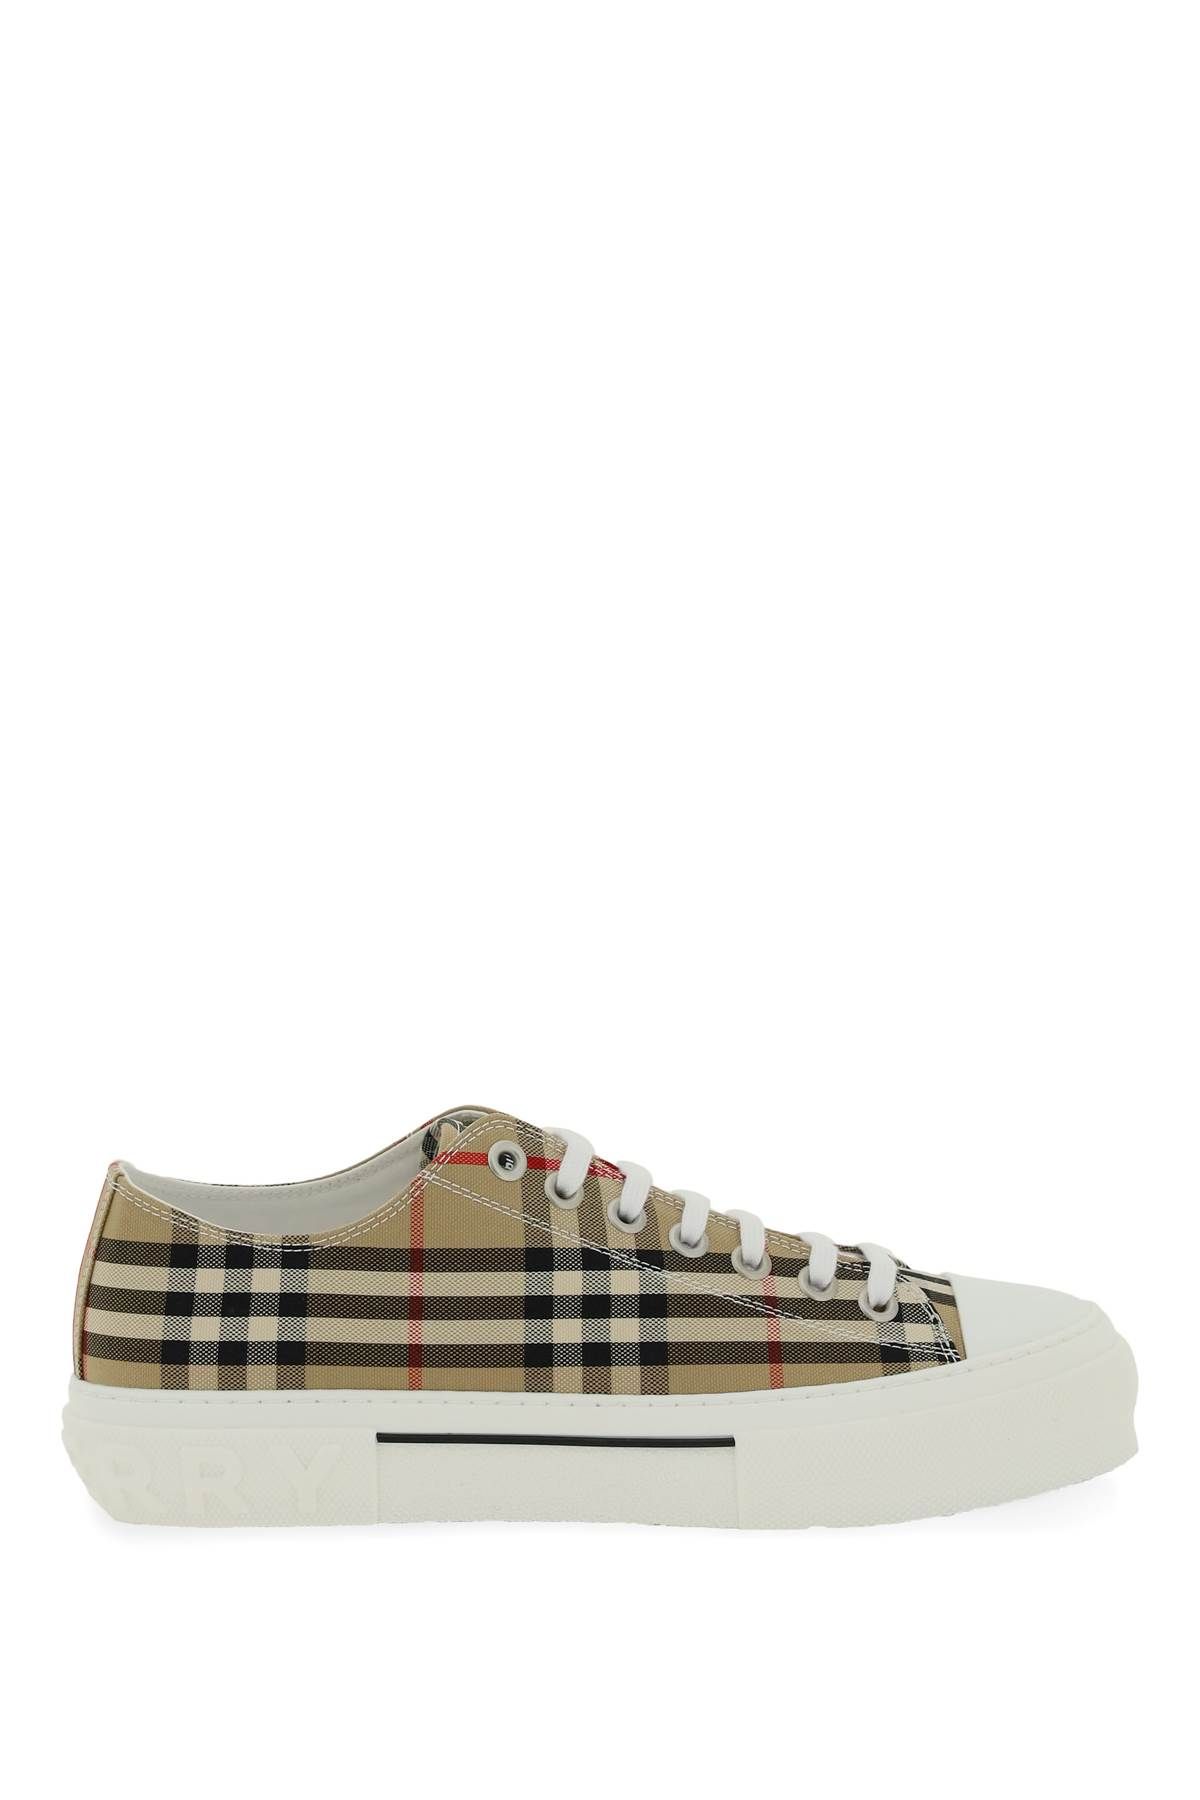 Shop Burberry Vintage Check Canvas Sneakers In White,beige,black